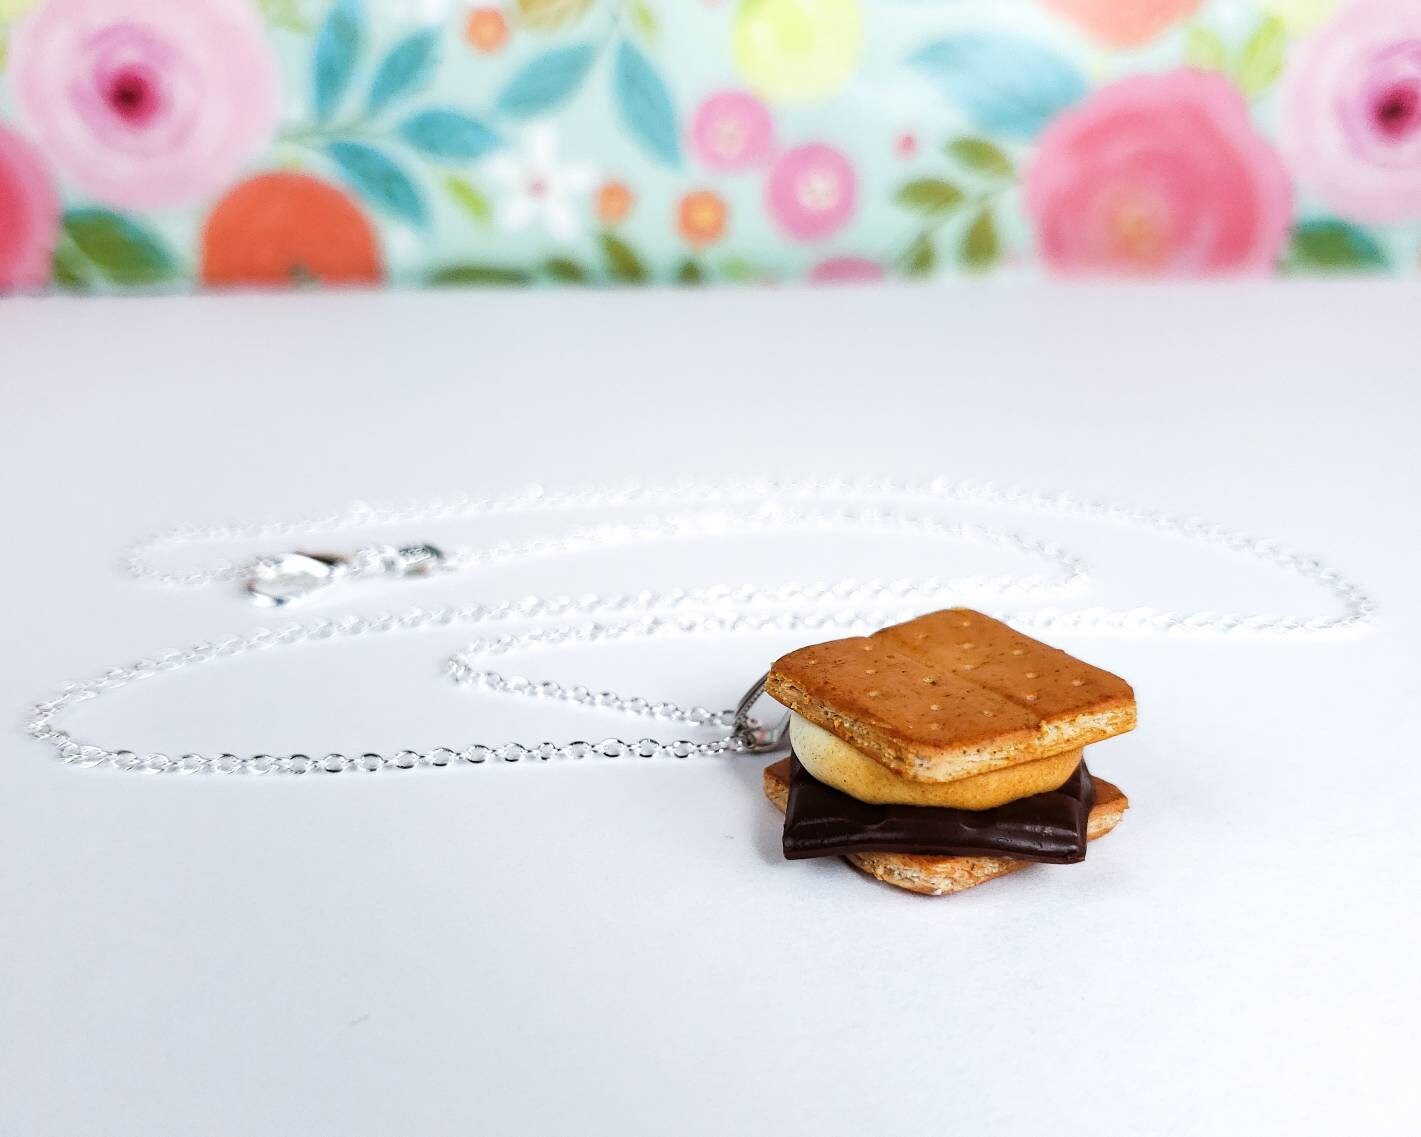 S'more Necklace